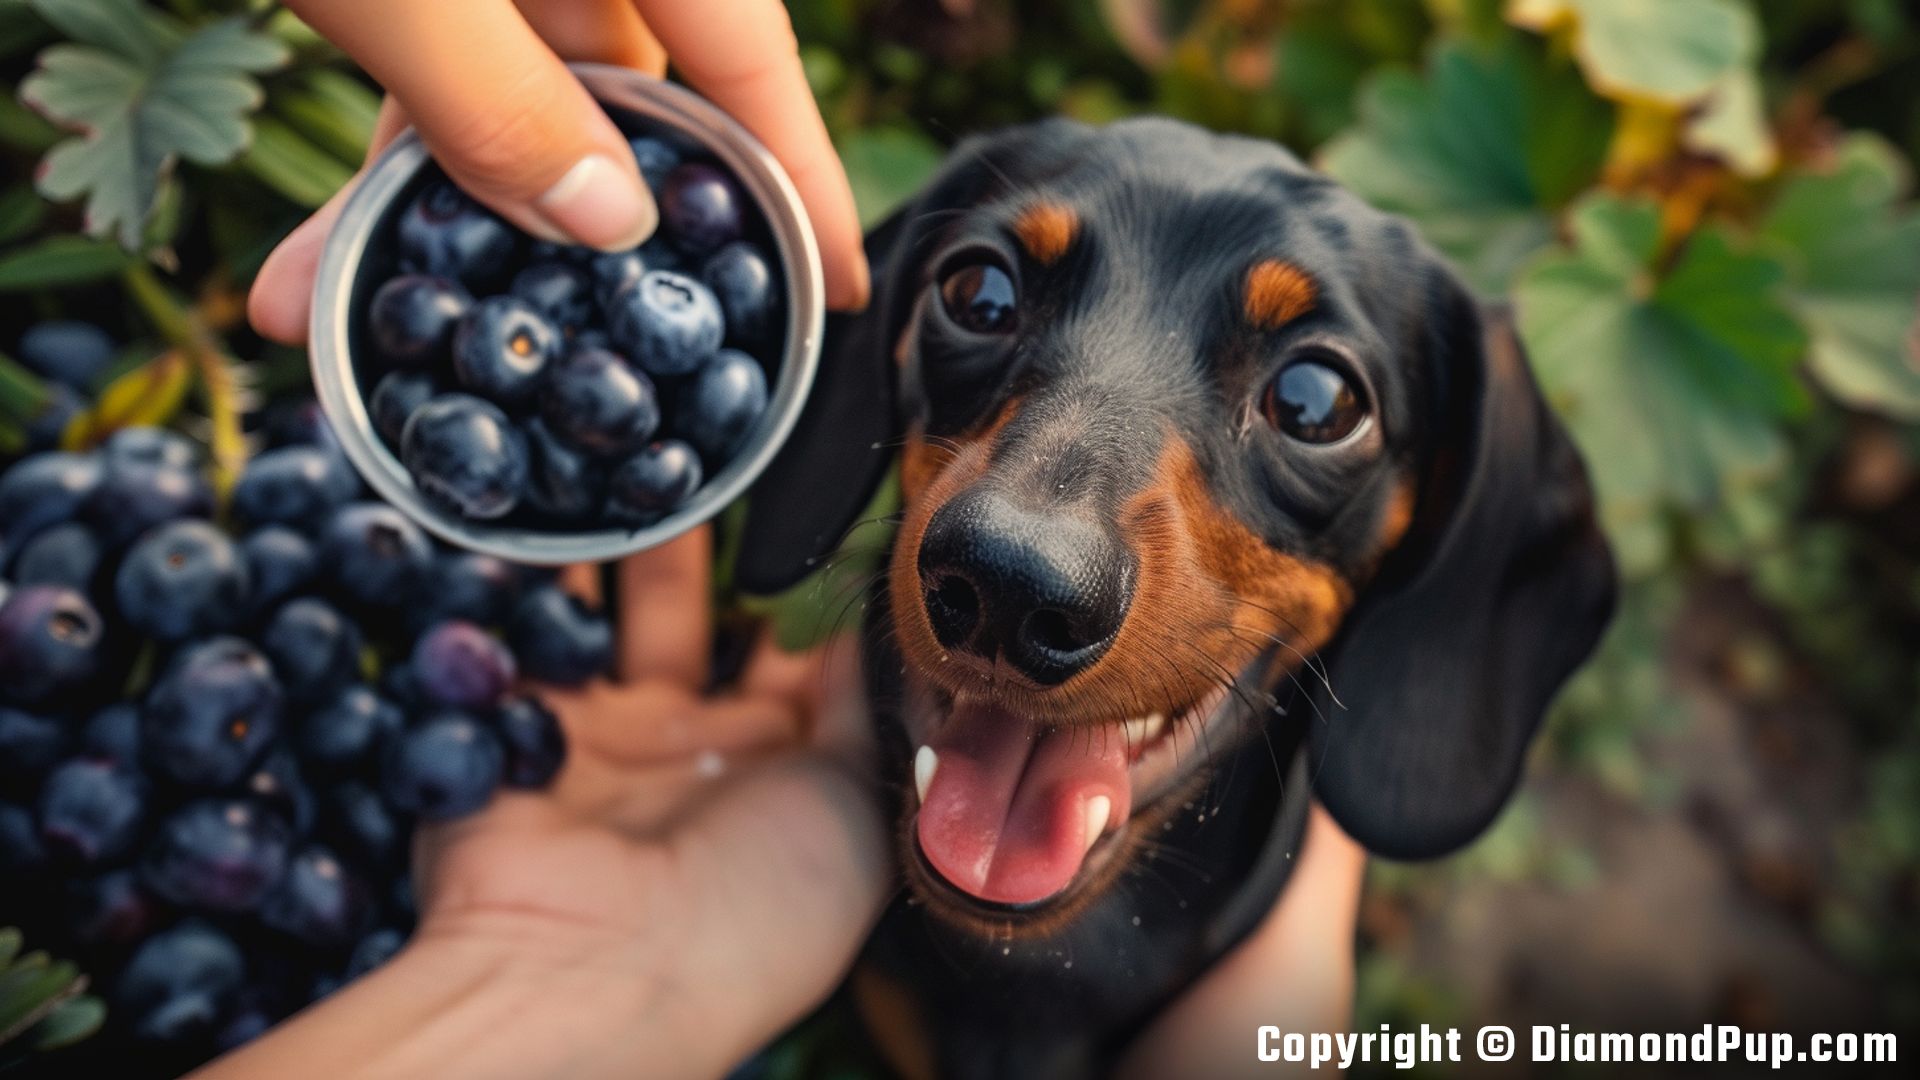 Image of an Adorable Dachshund Eating Blueberries